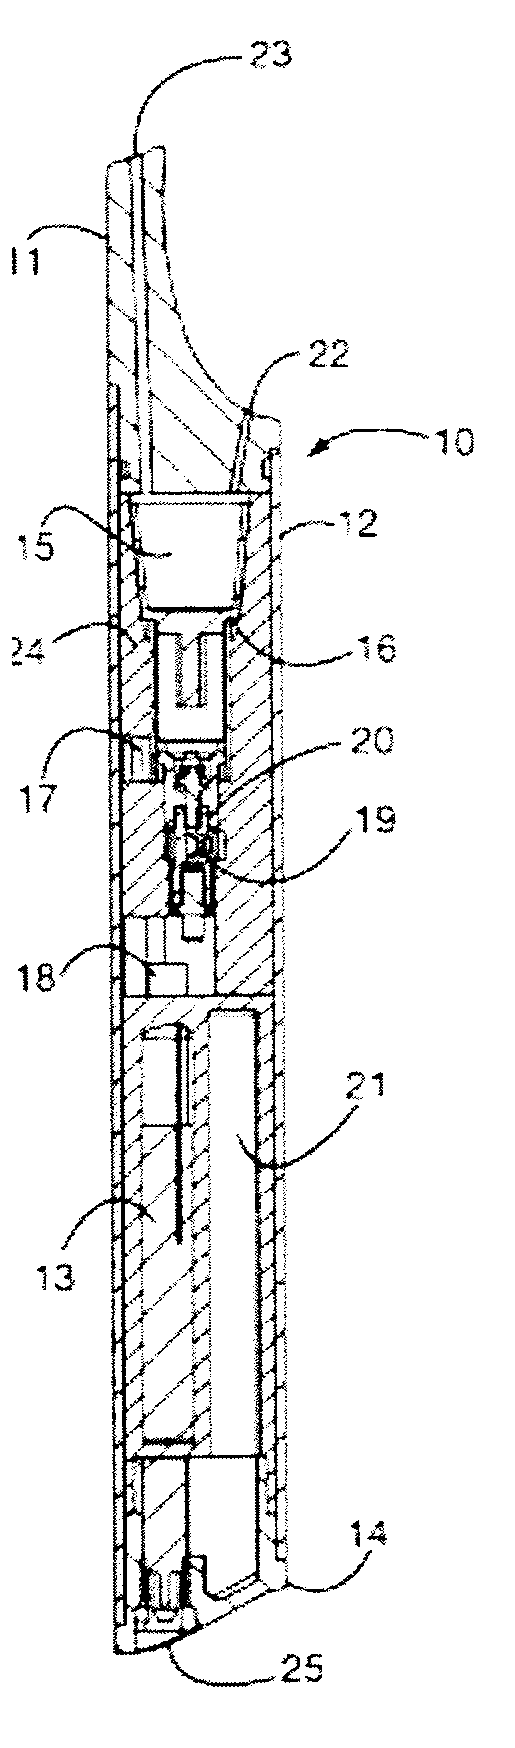 Portable devices for generating an inhalable vapor